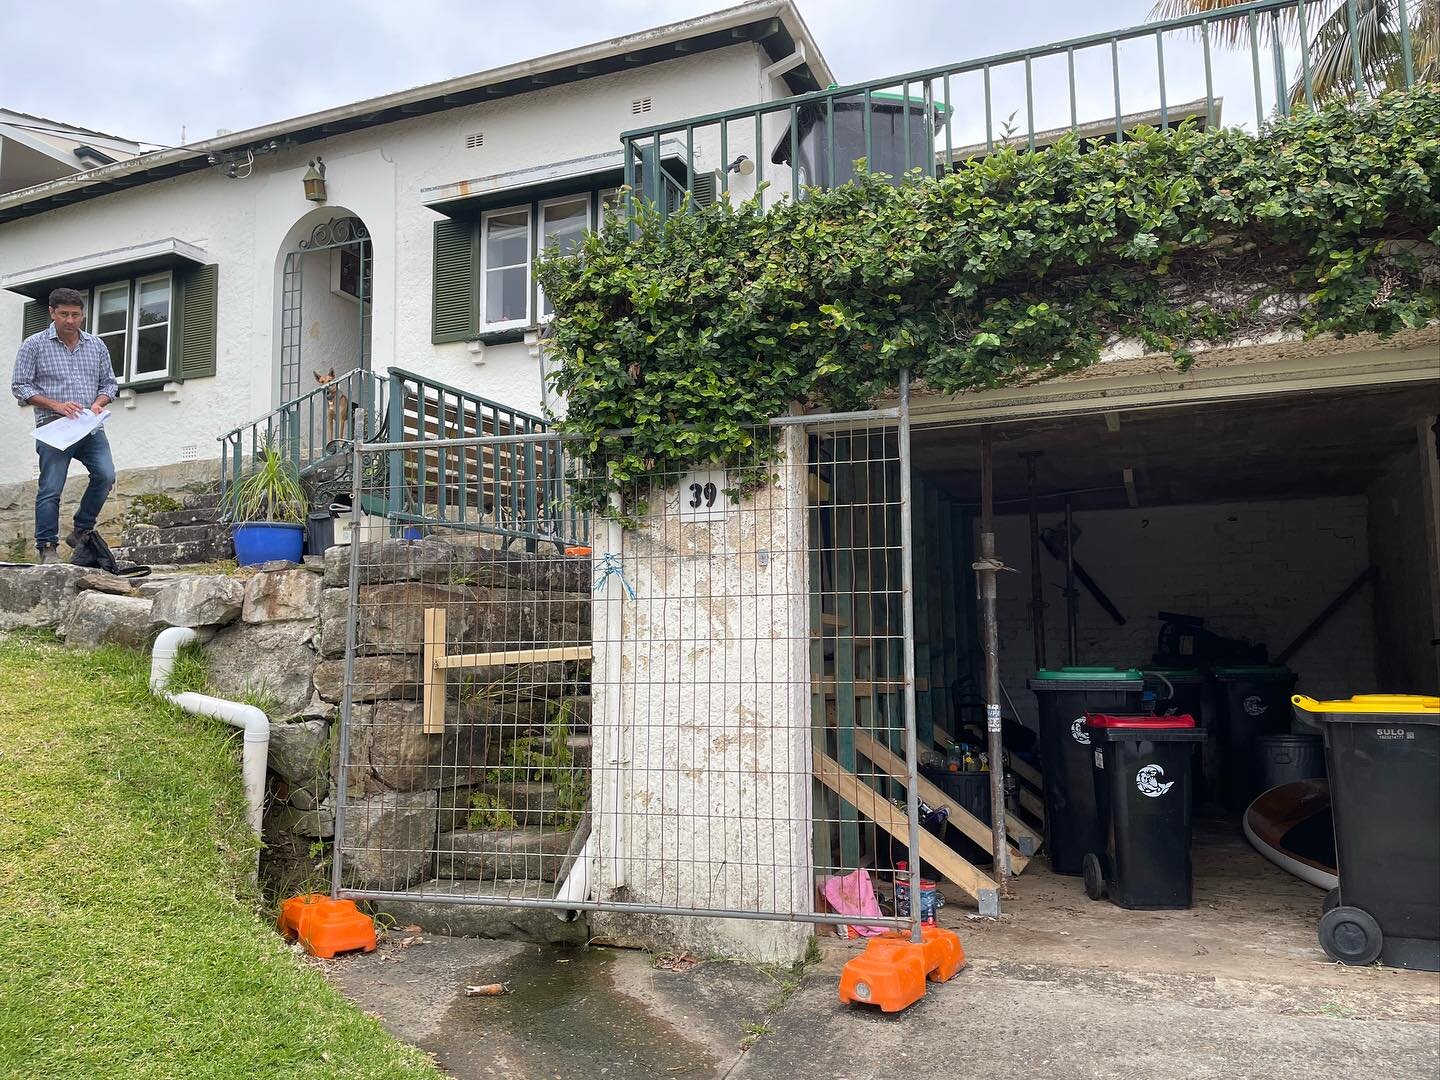 Our team are pushing hard before the long weekend on our Balgowlah Heights project. This project started last year with removing the collapsing single garage and corner of the house. The new larger spaces will add huge value to this home. #esiconstru